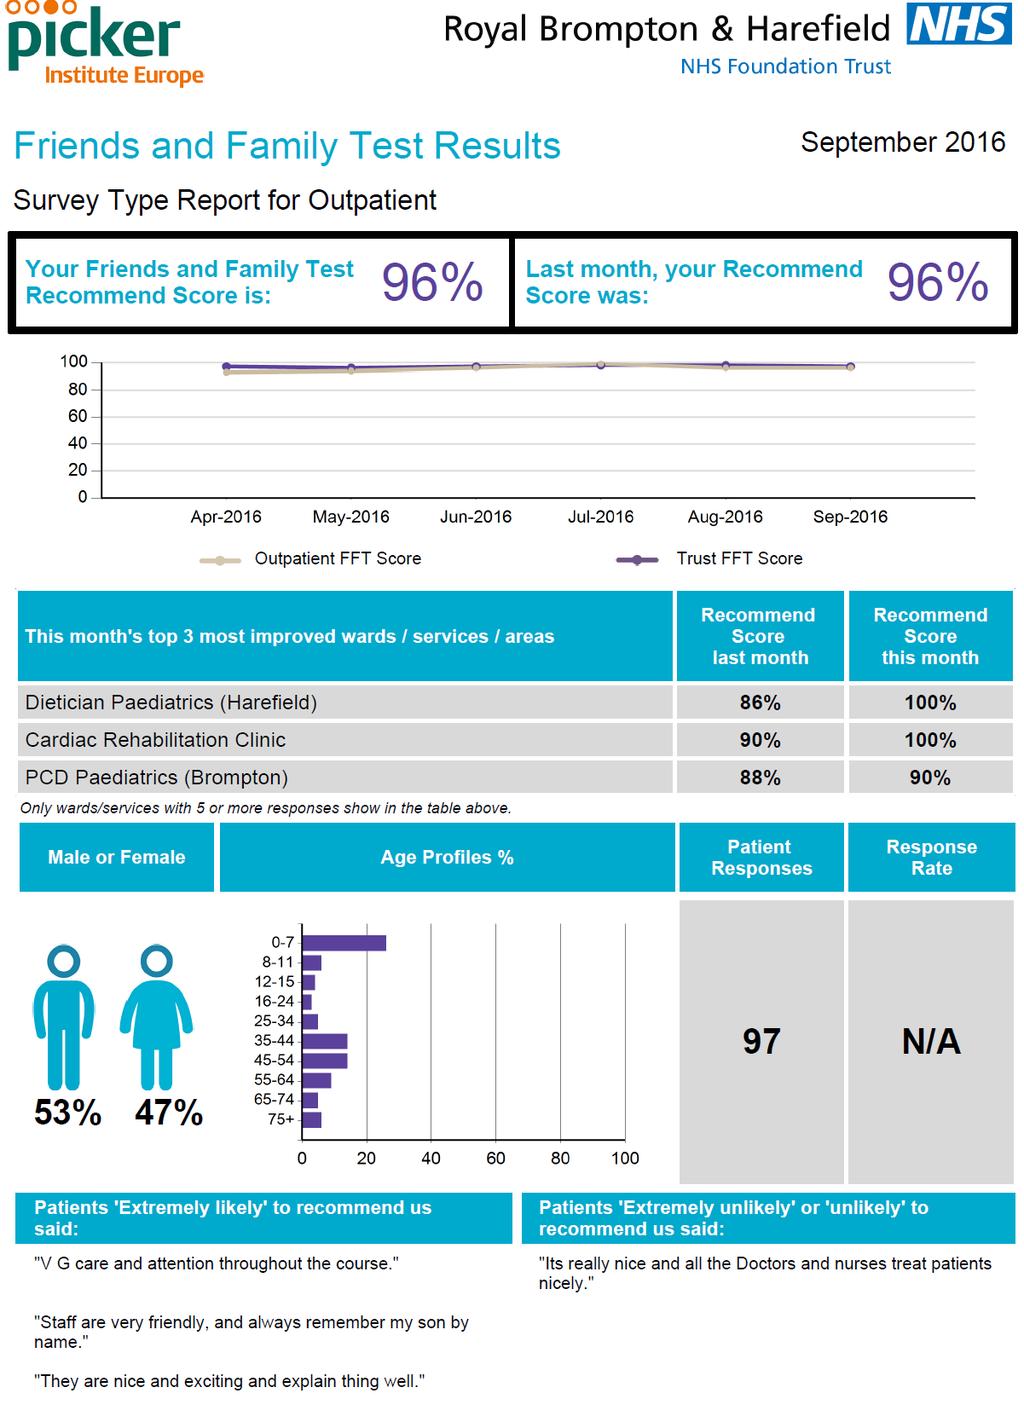 The FFT Outpatient report